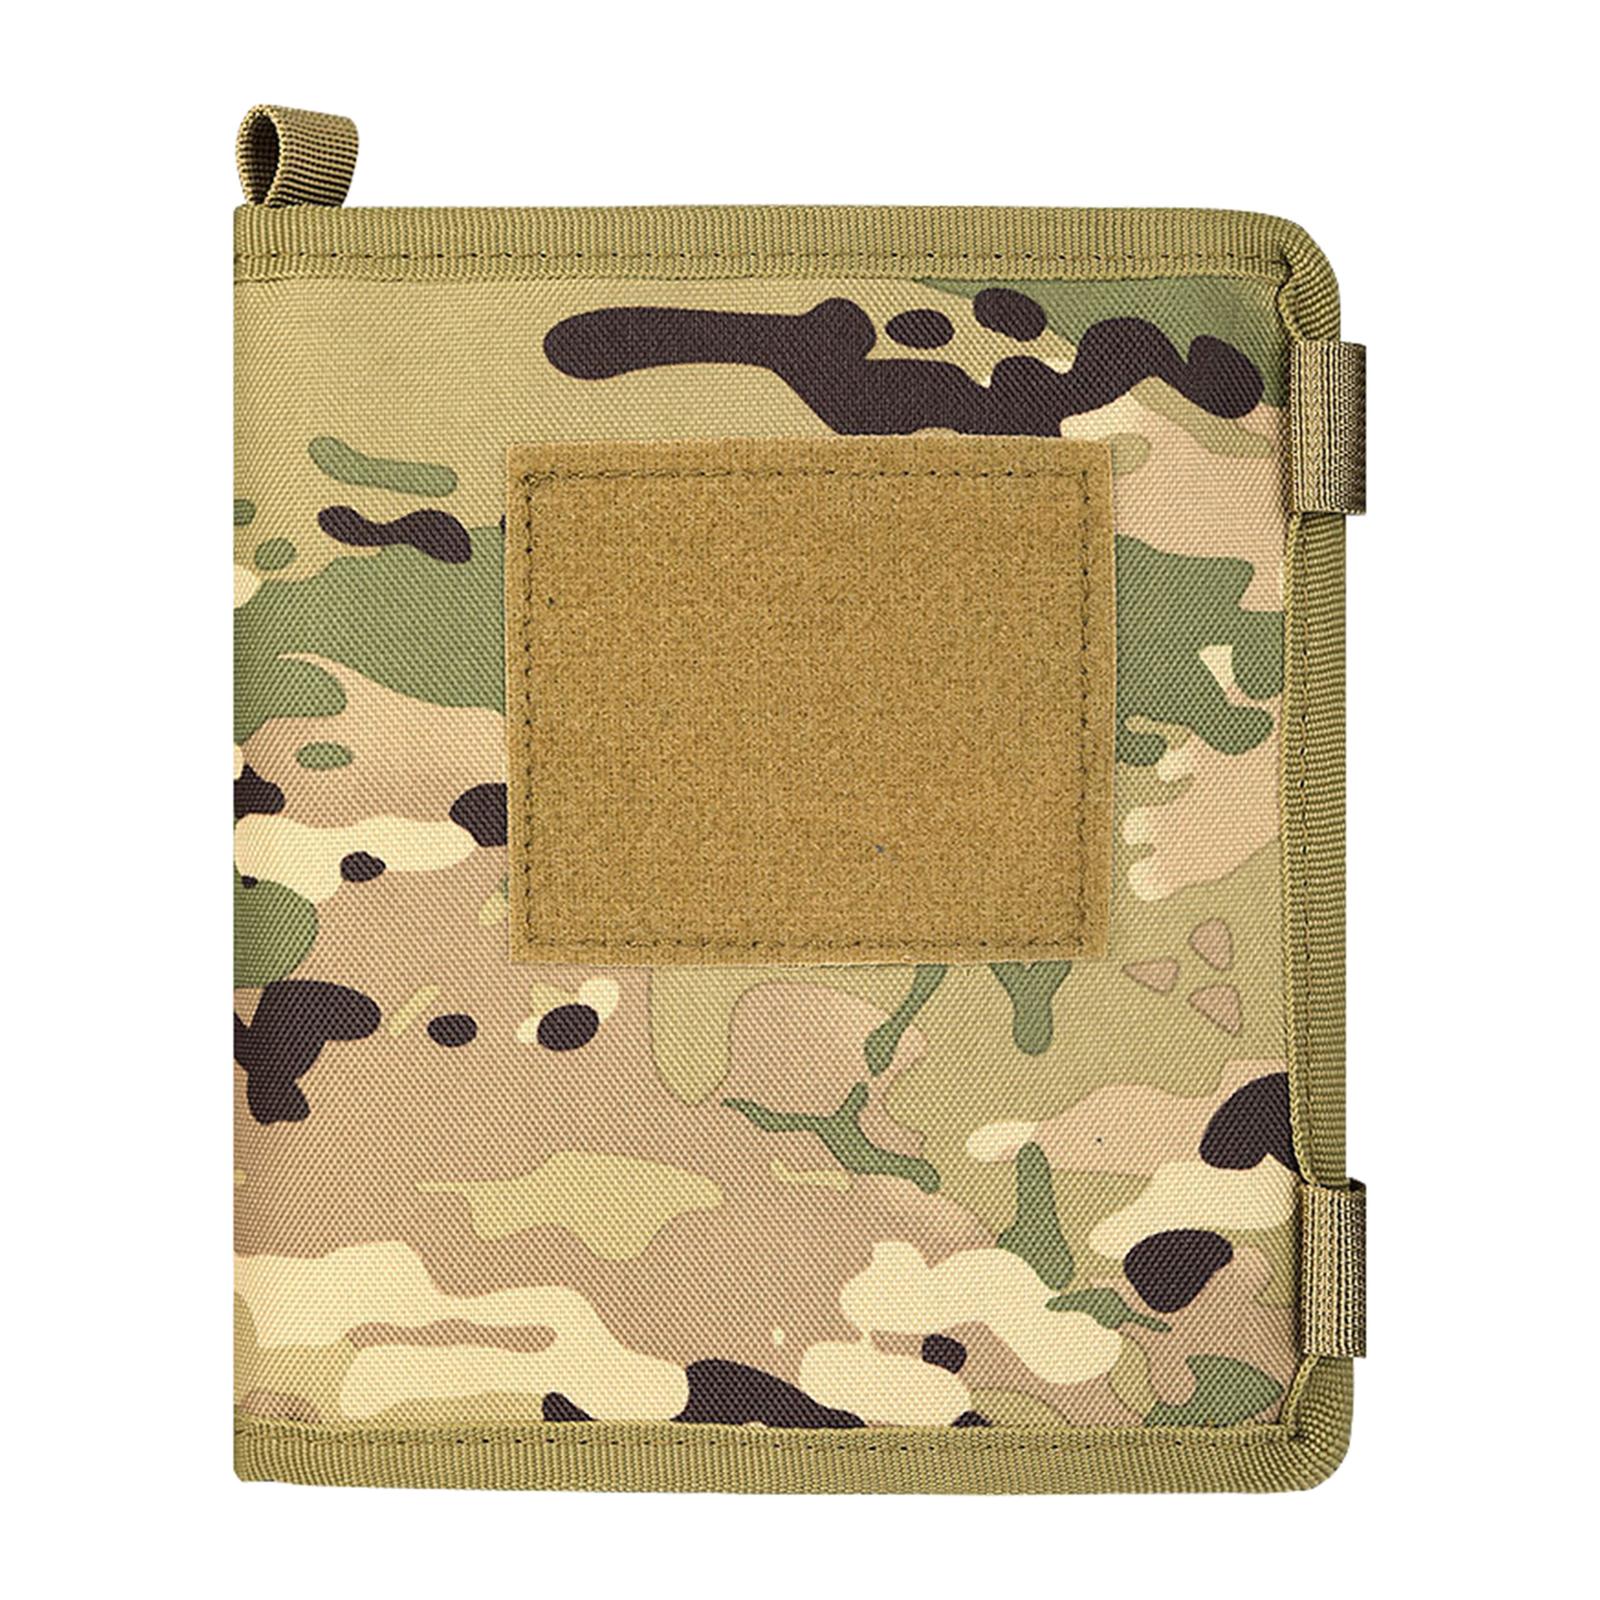 Map Bag Map Pocket Case for Camping Travel Outdoor Activities